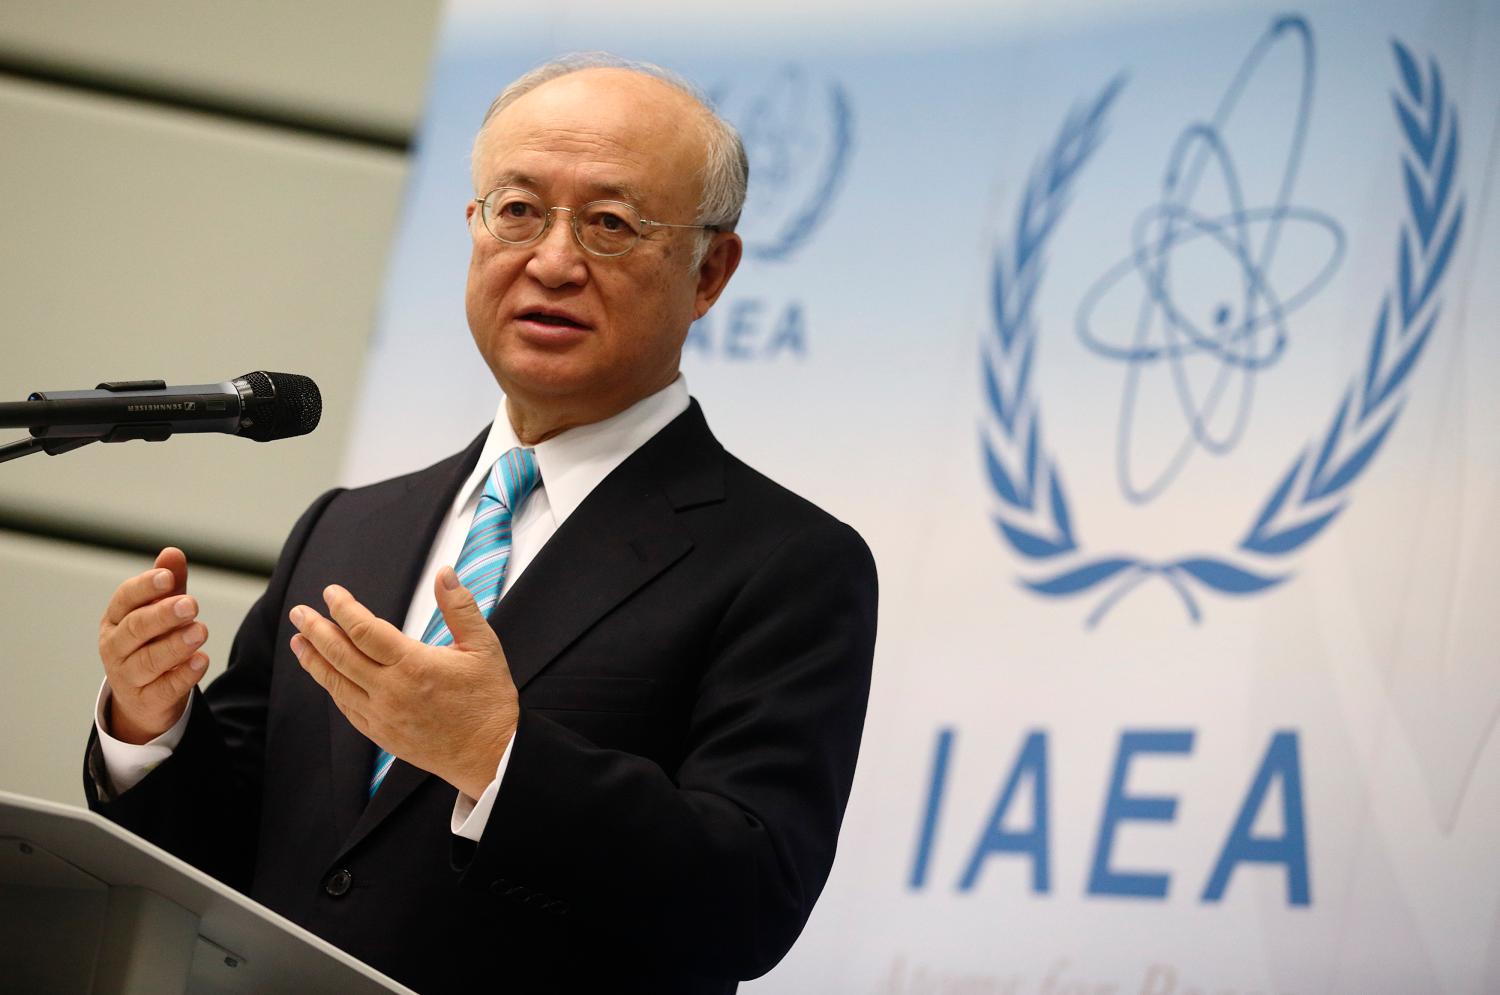 International Atomic Energy Agency (IAEA) Director General Yukiya Amano addresses a news conference after a board of governors meeting at the IAEA headquarters in Vienna March 2, 2015. REUTERS/Heinz-Peter Bader